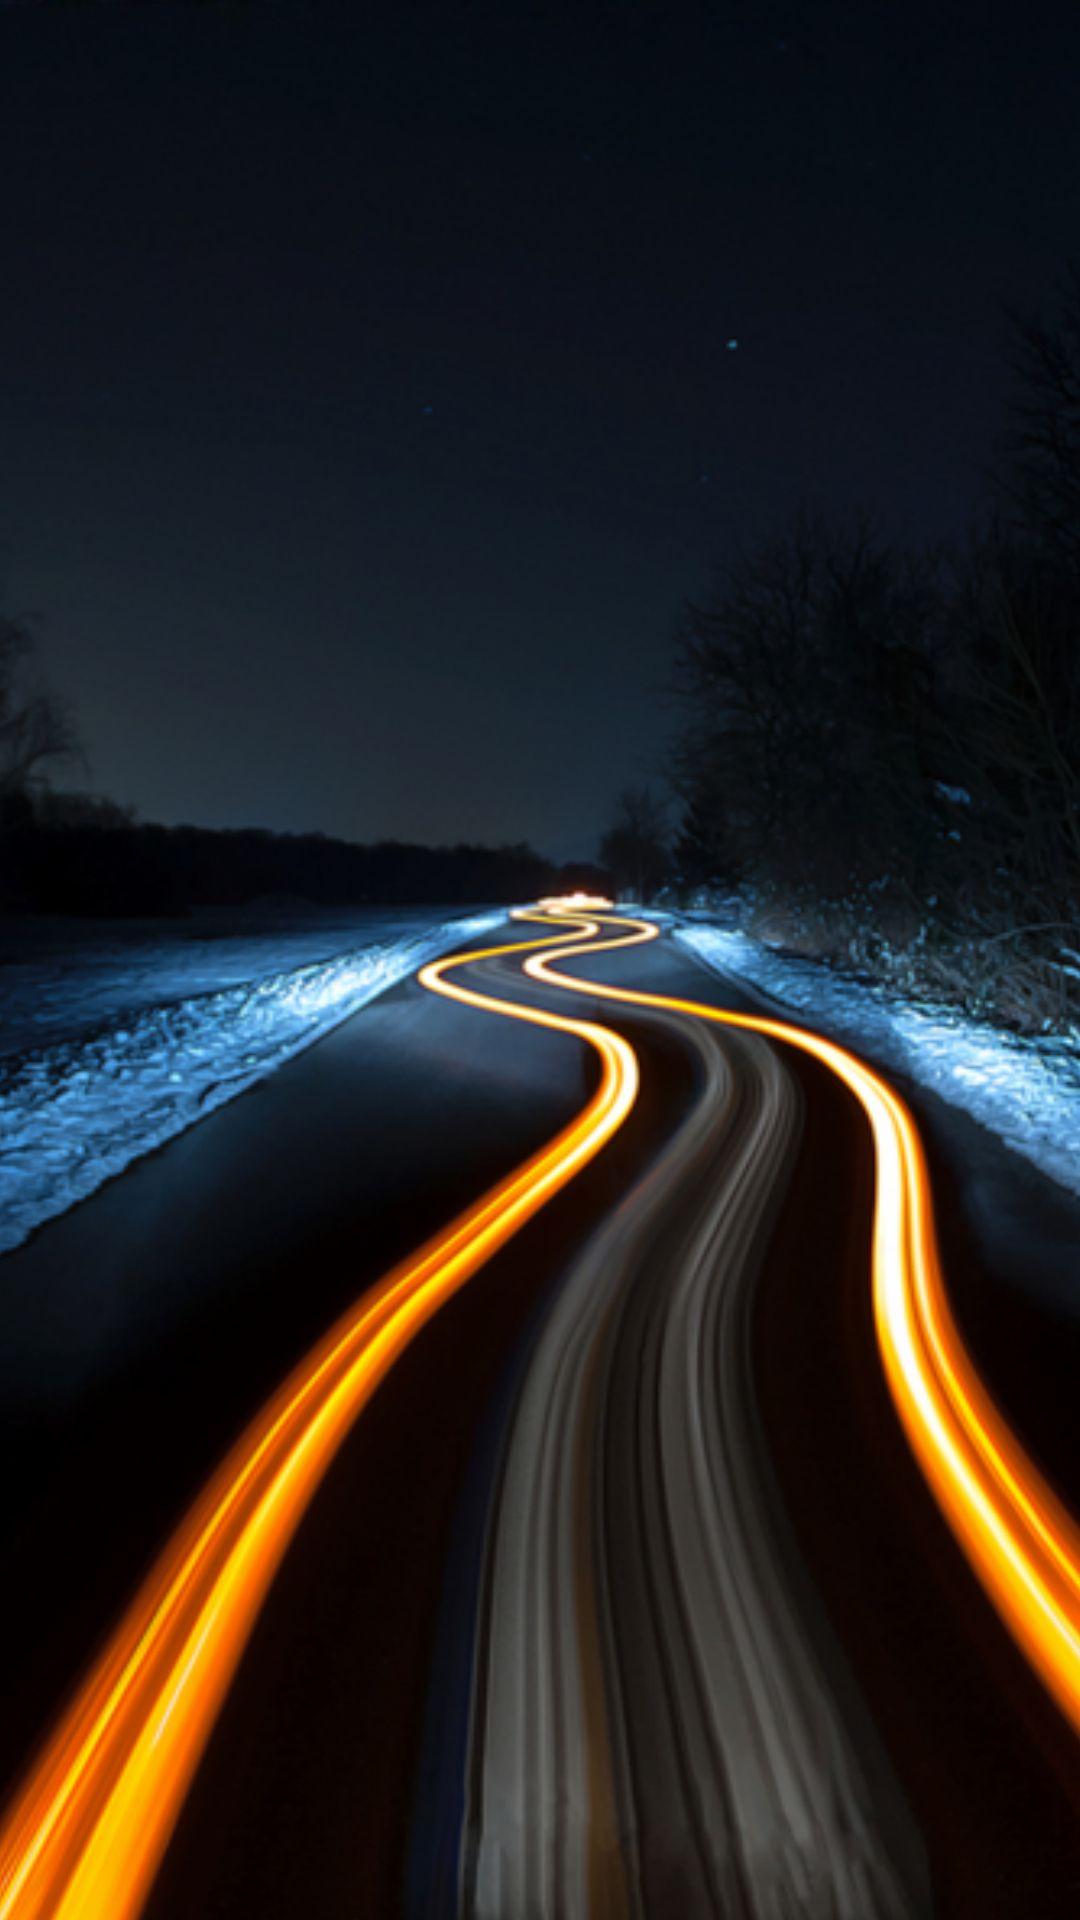 Long Exposure on the road #photography #neat